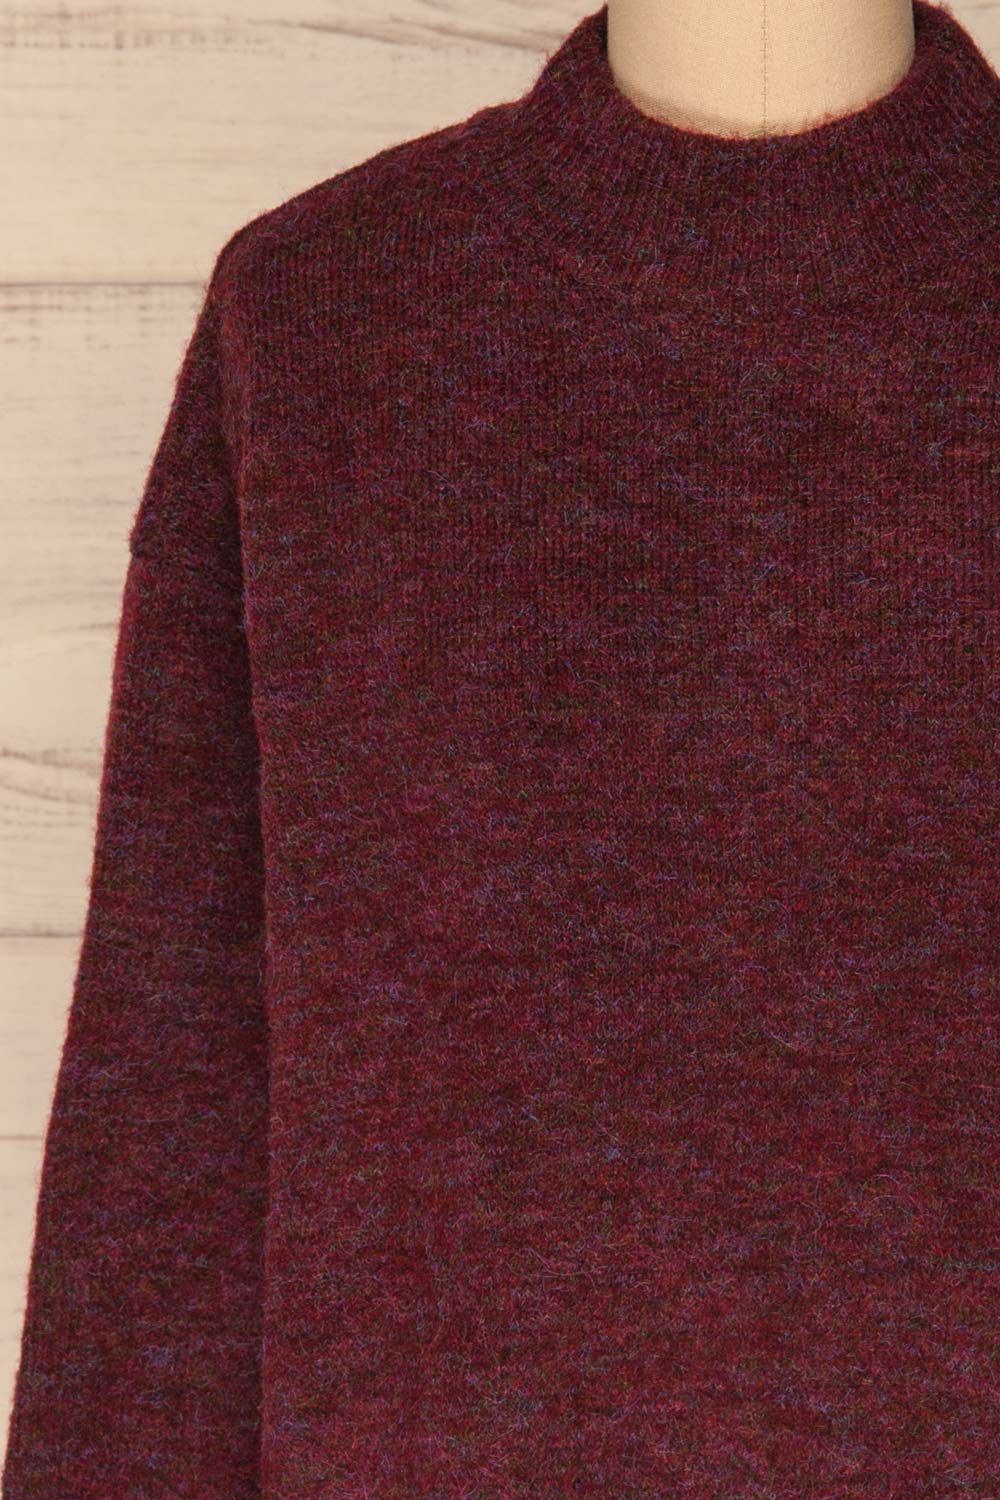 Herning Burgundy High-Neck Knit Sweater | Boutique 1861 front close-up